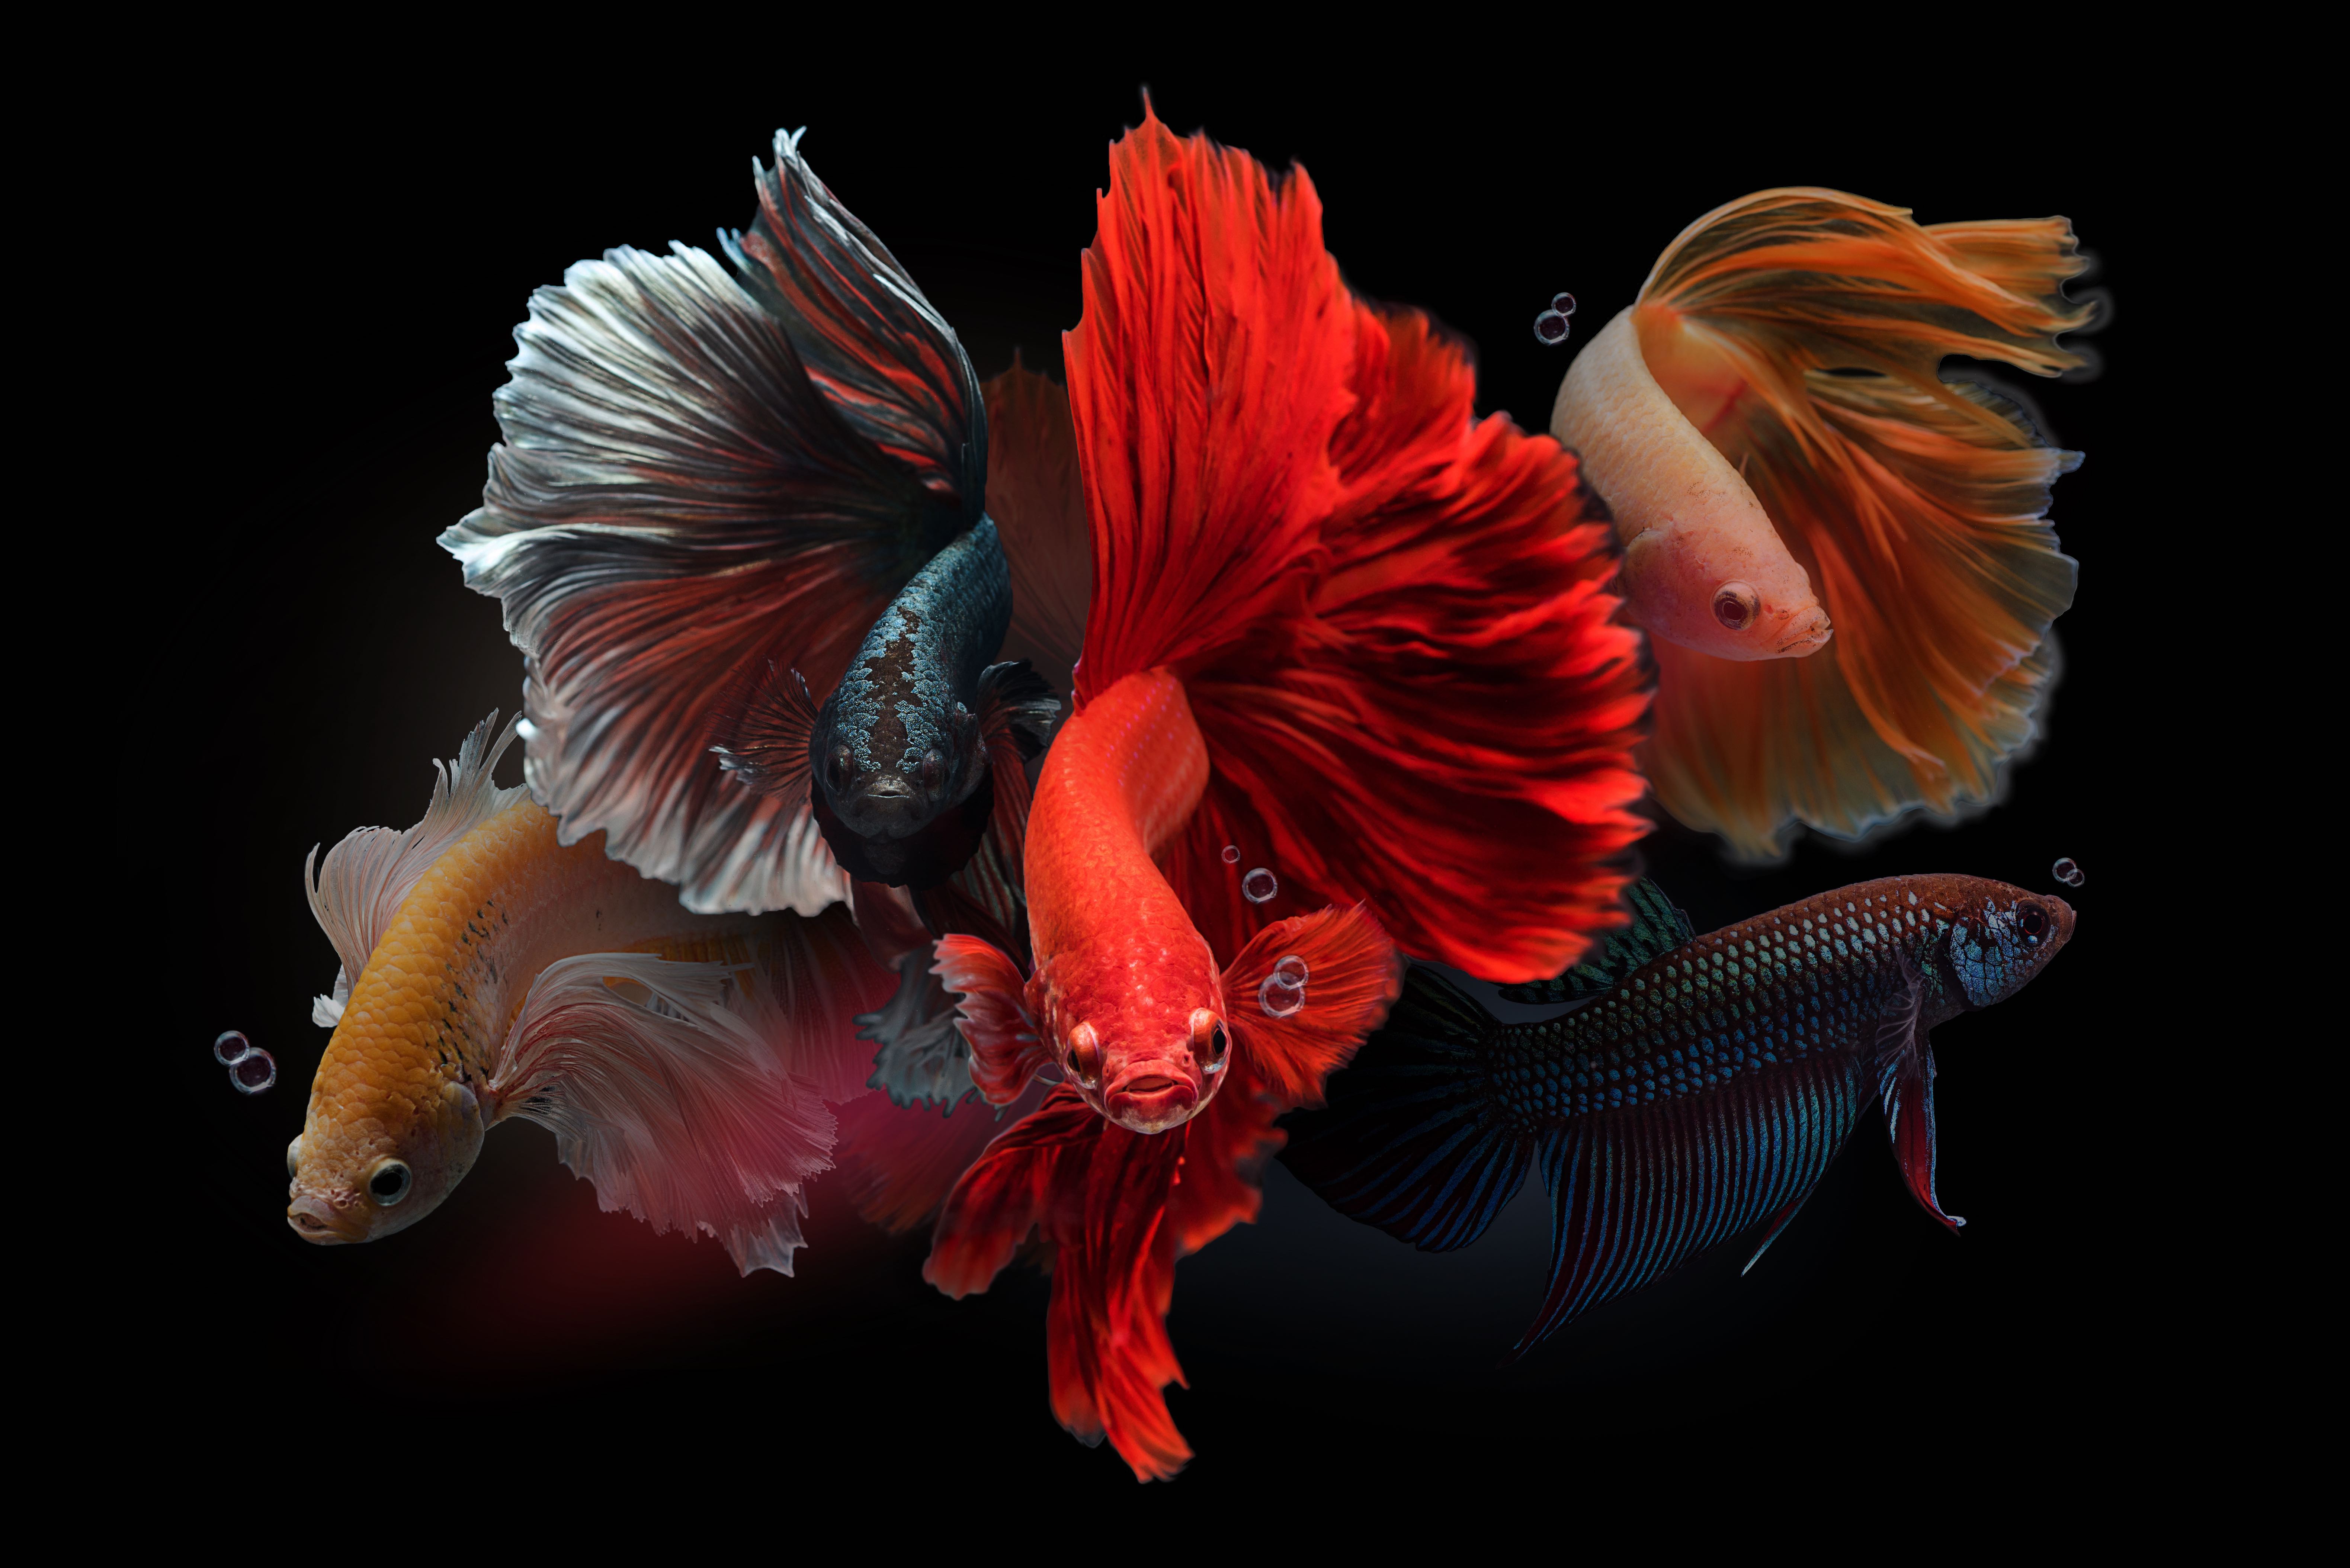 40 Types of Betta Fish Too Beautiful To Miss - Facts.net